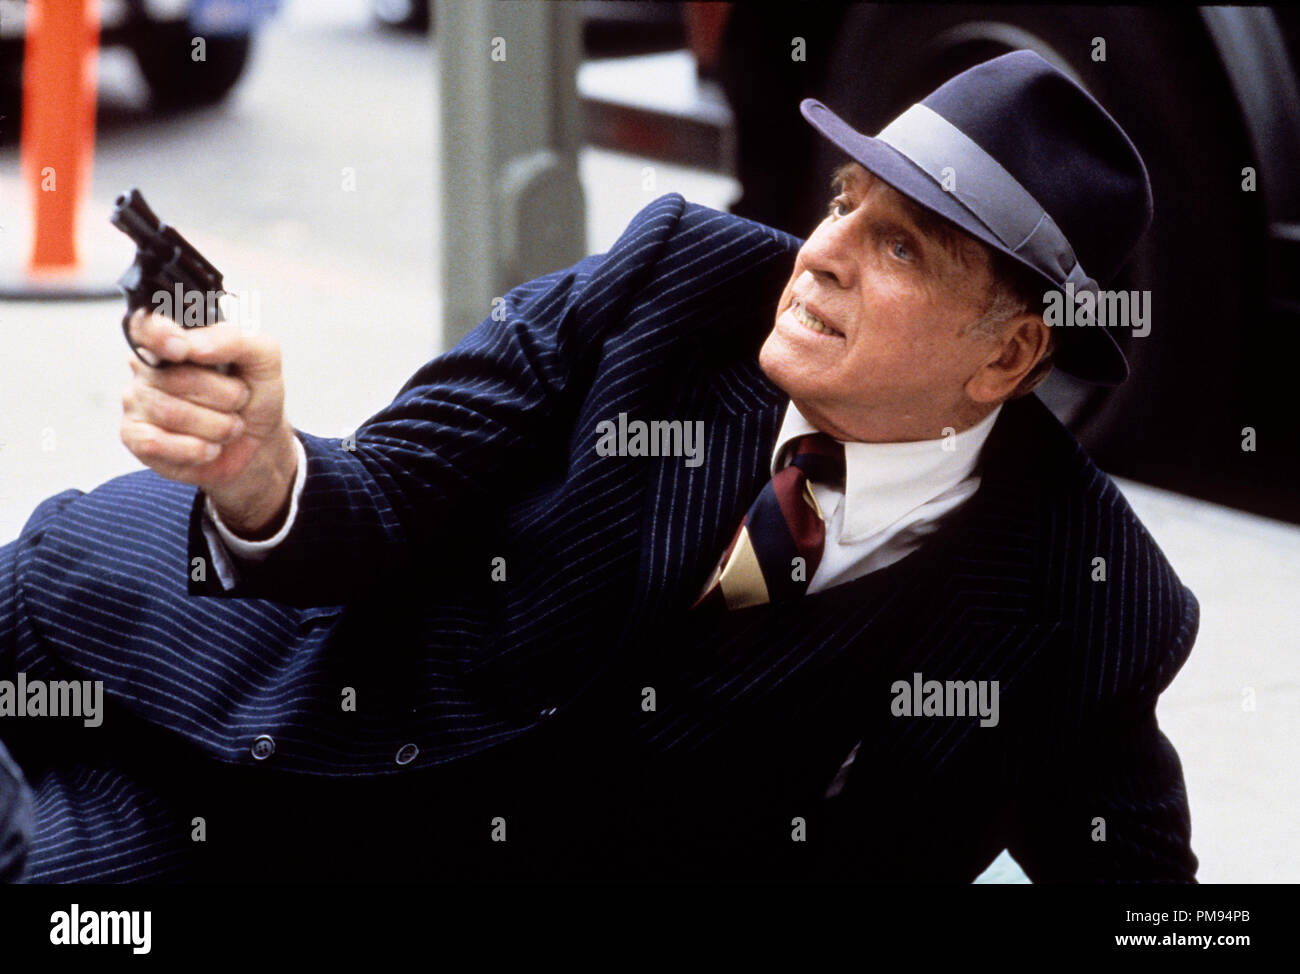 Studio Publicity Still from "Tough Guys" Burt Lancaster © 1986 Touchstone Pictures  All Rights Reserved   File Reference # 31700024THA  For Editorial Use Only Stock Photo